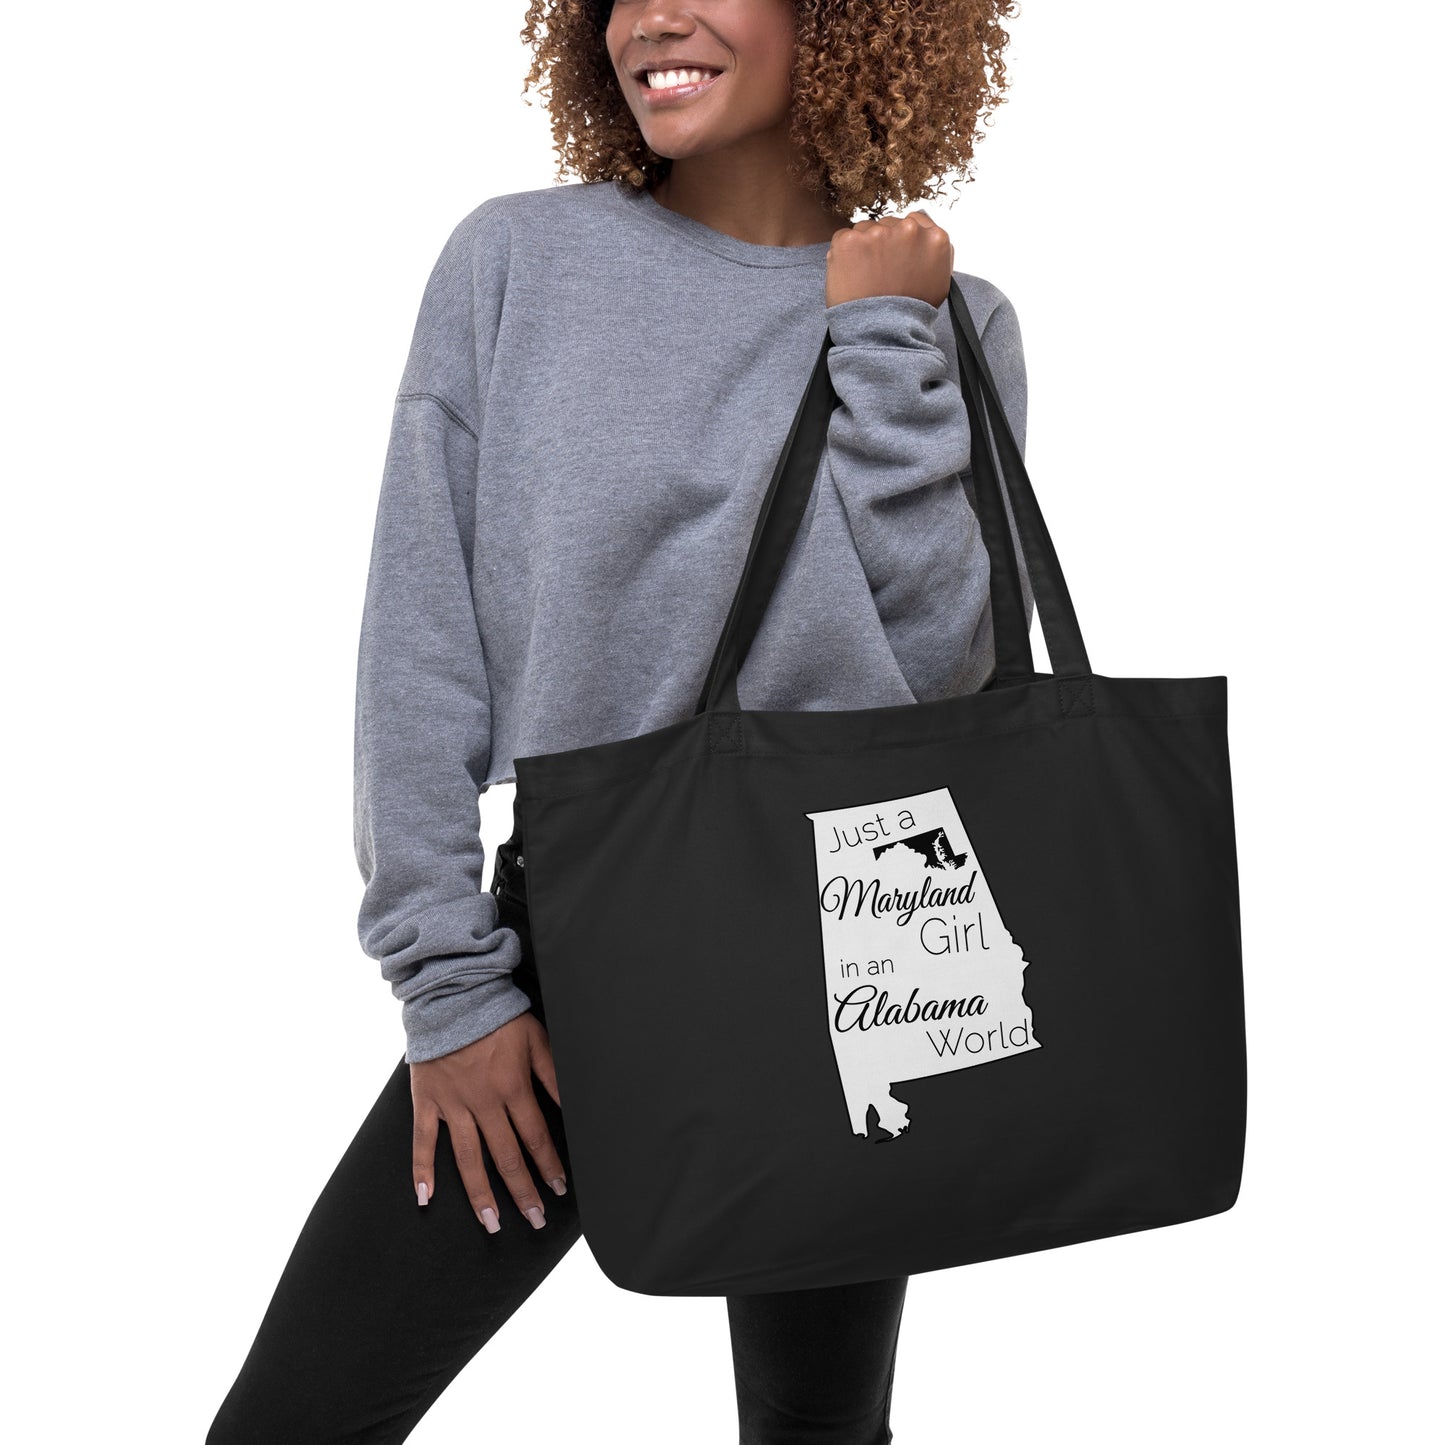 Just a Maryland Girl in an Alabama World Large organic tote bag